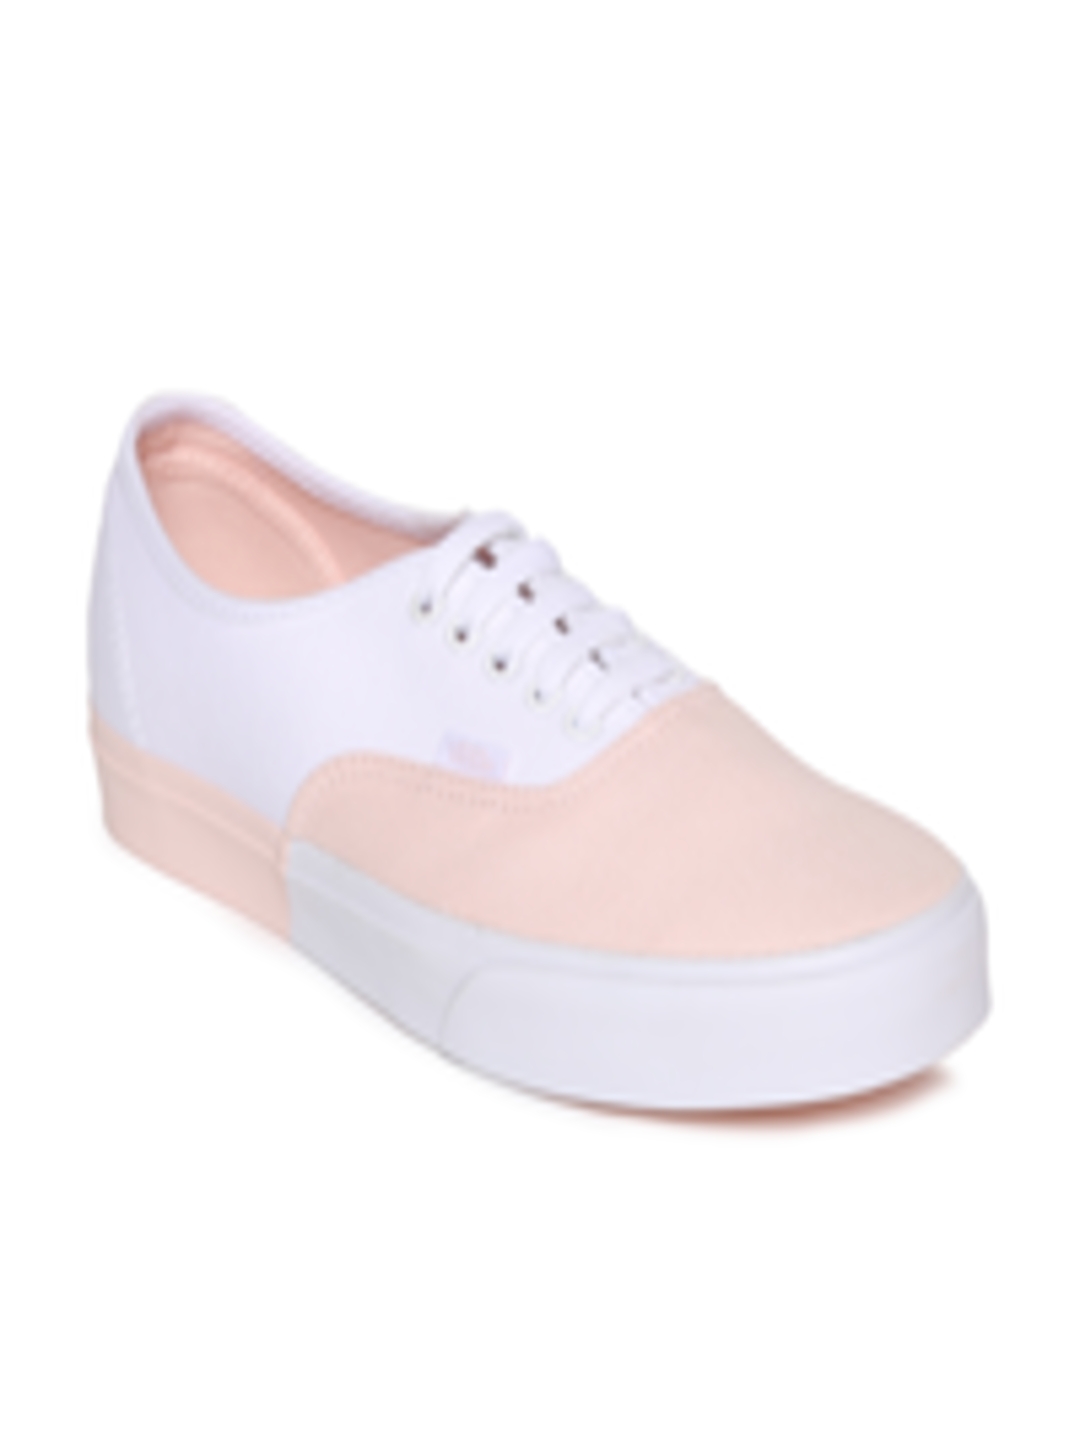 Buy Vans Unisex White & Pink Authentic Sneakers - Casual Shoes for